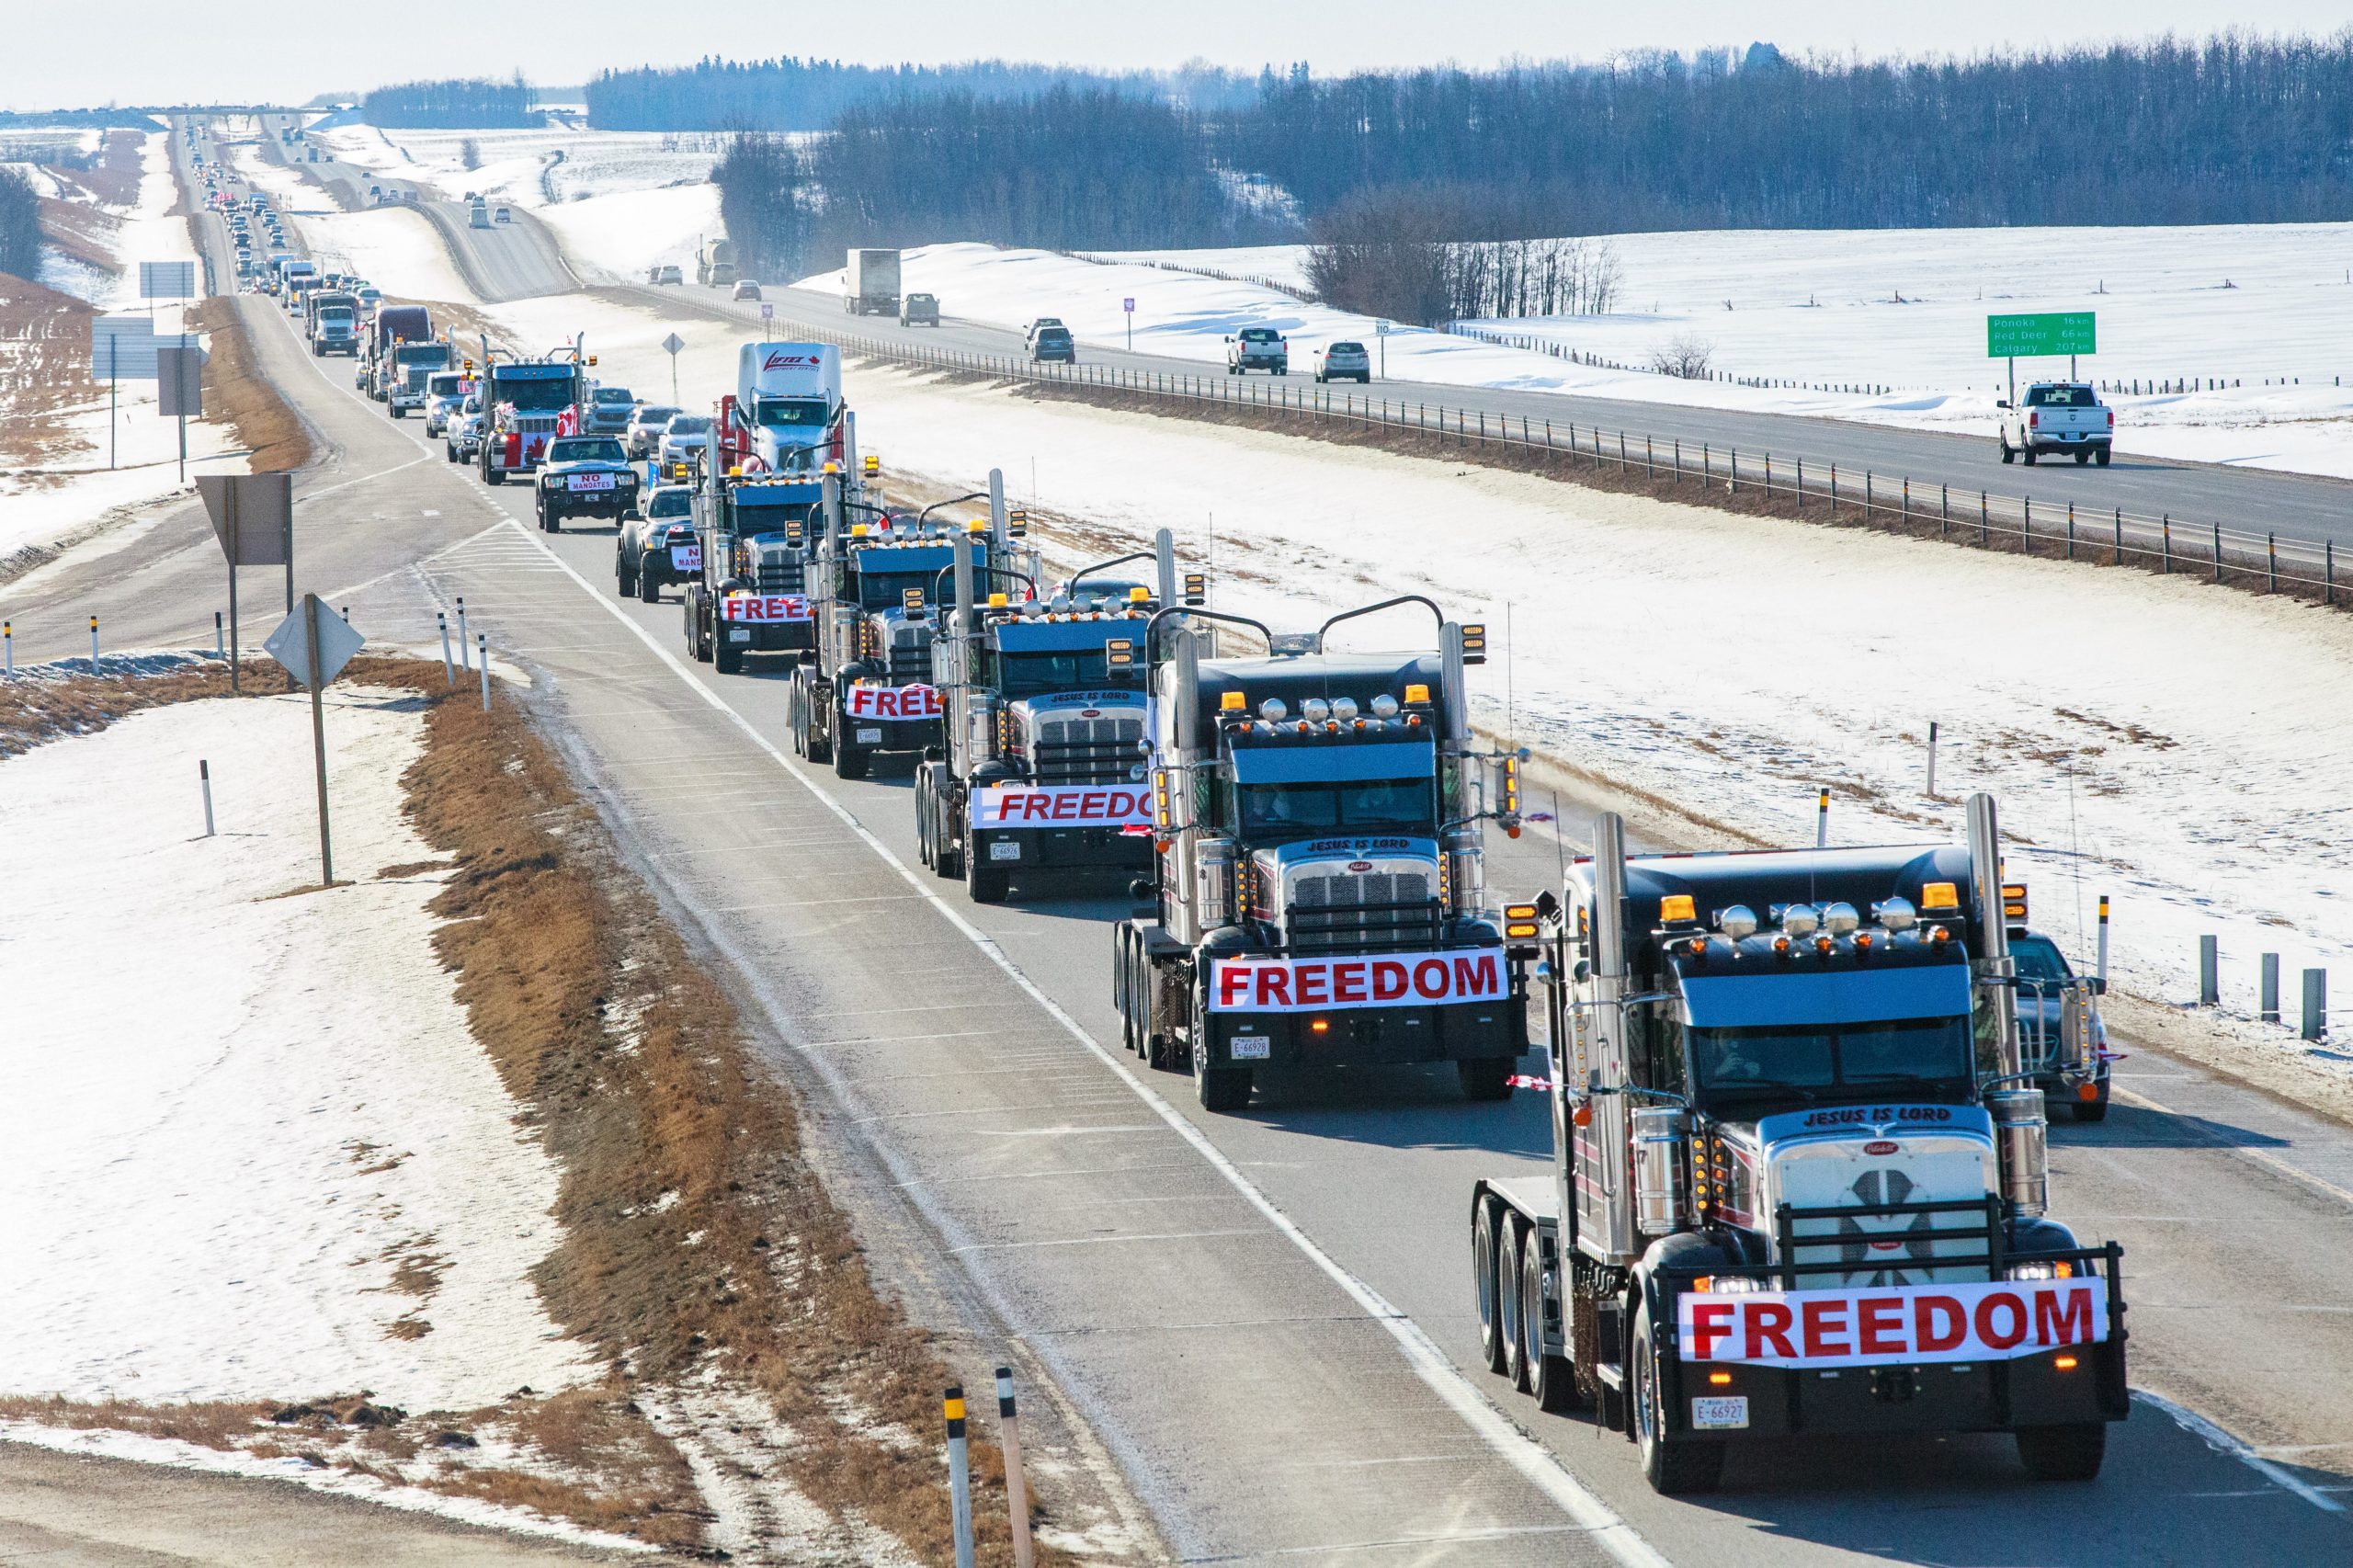 trucker protests freedom on highway of canada